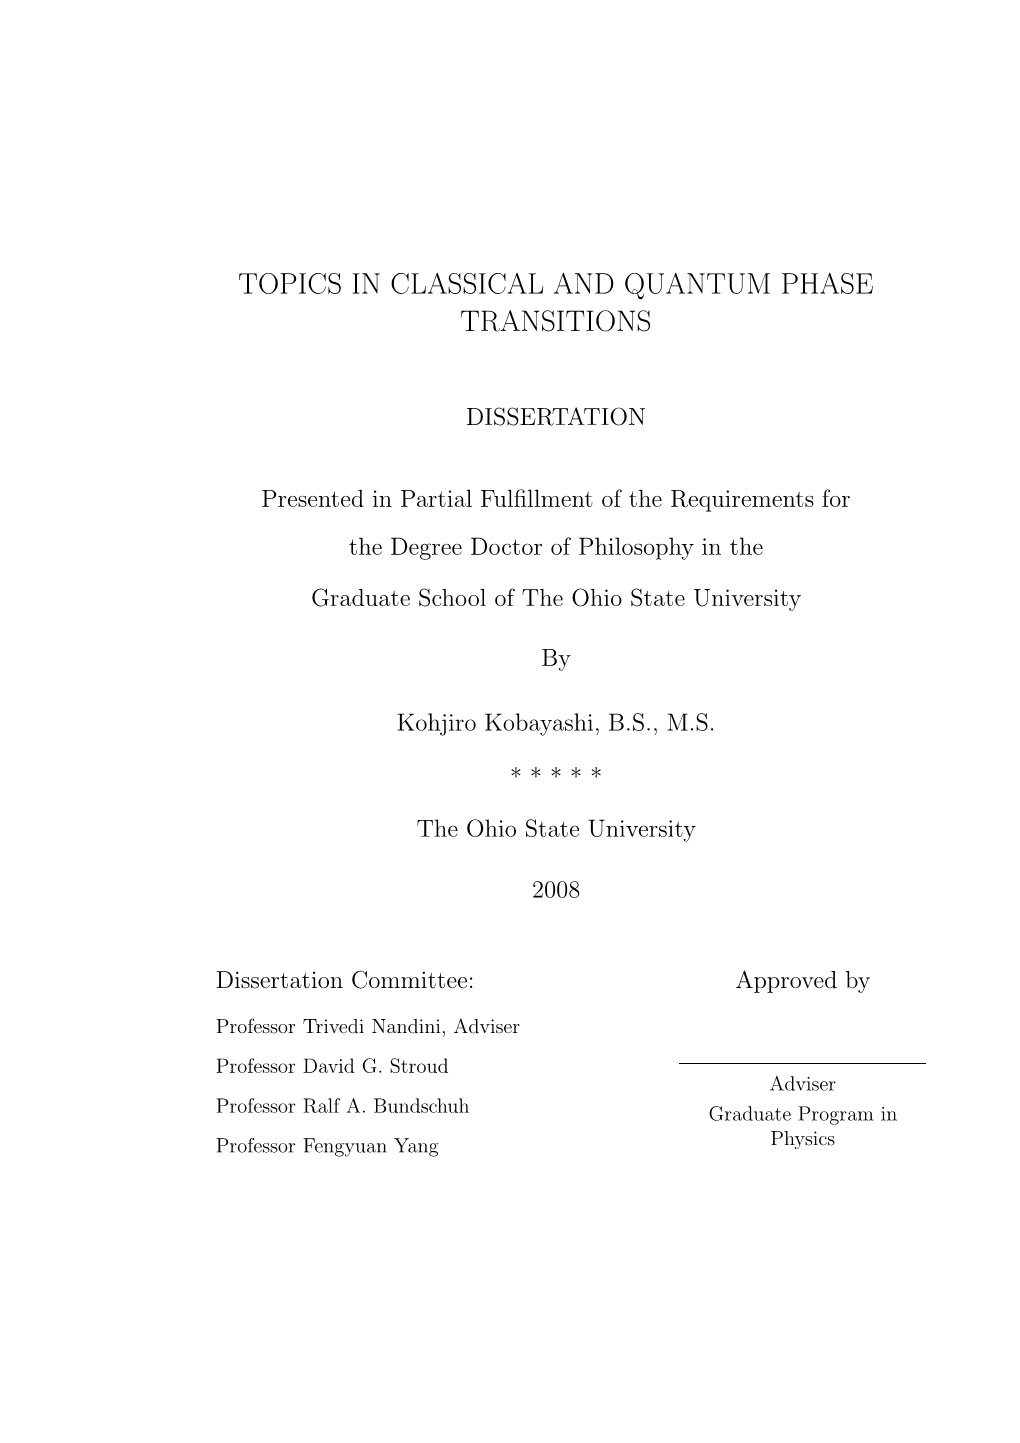 Topics in Classical and Quantum Phase Transitions